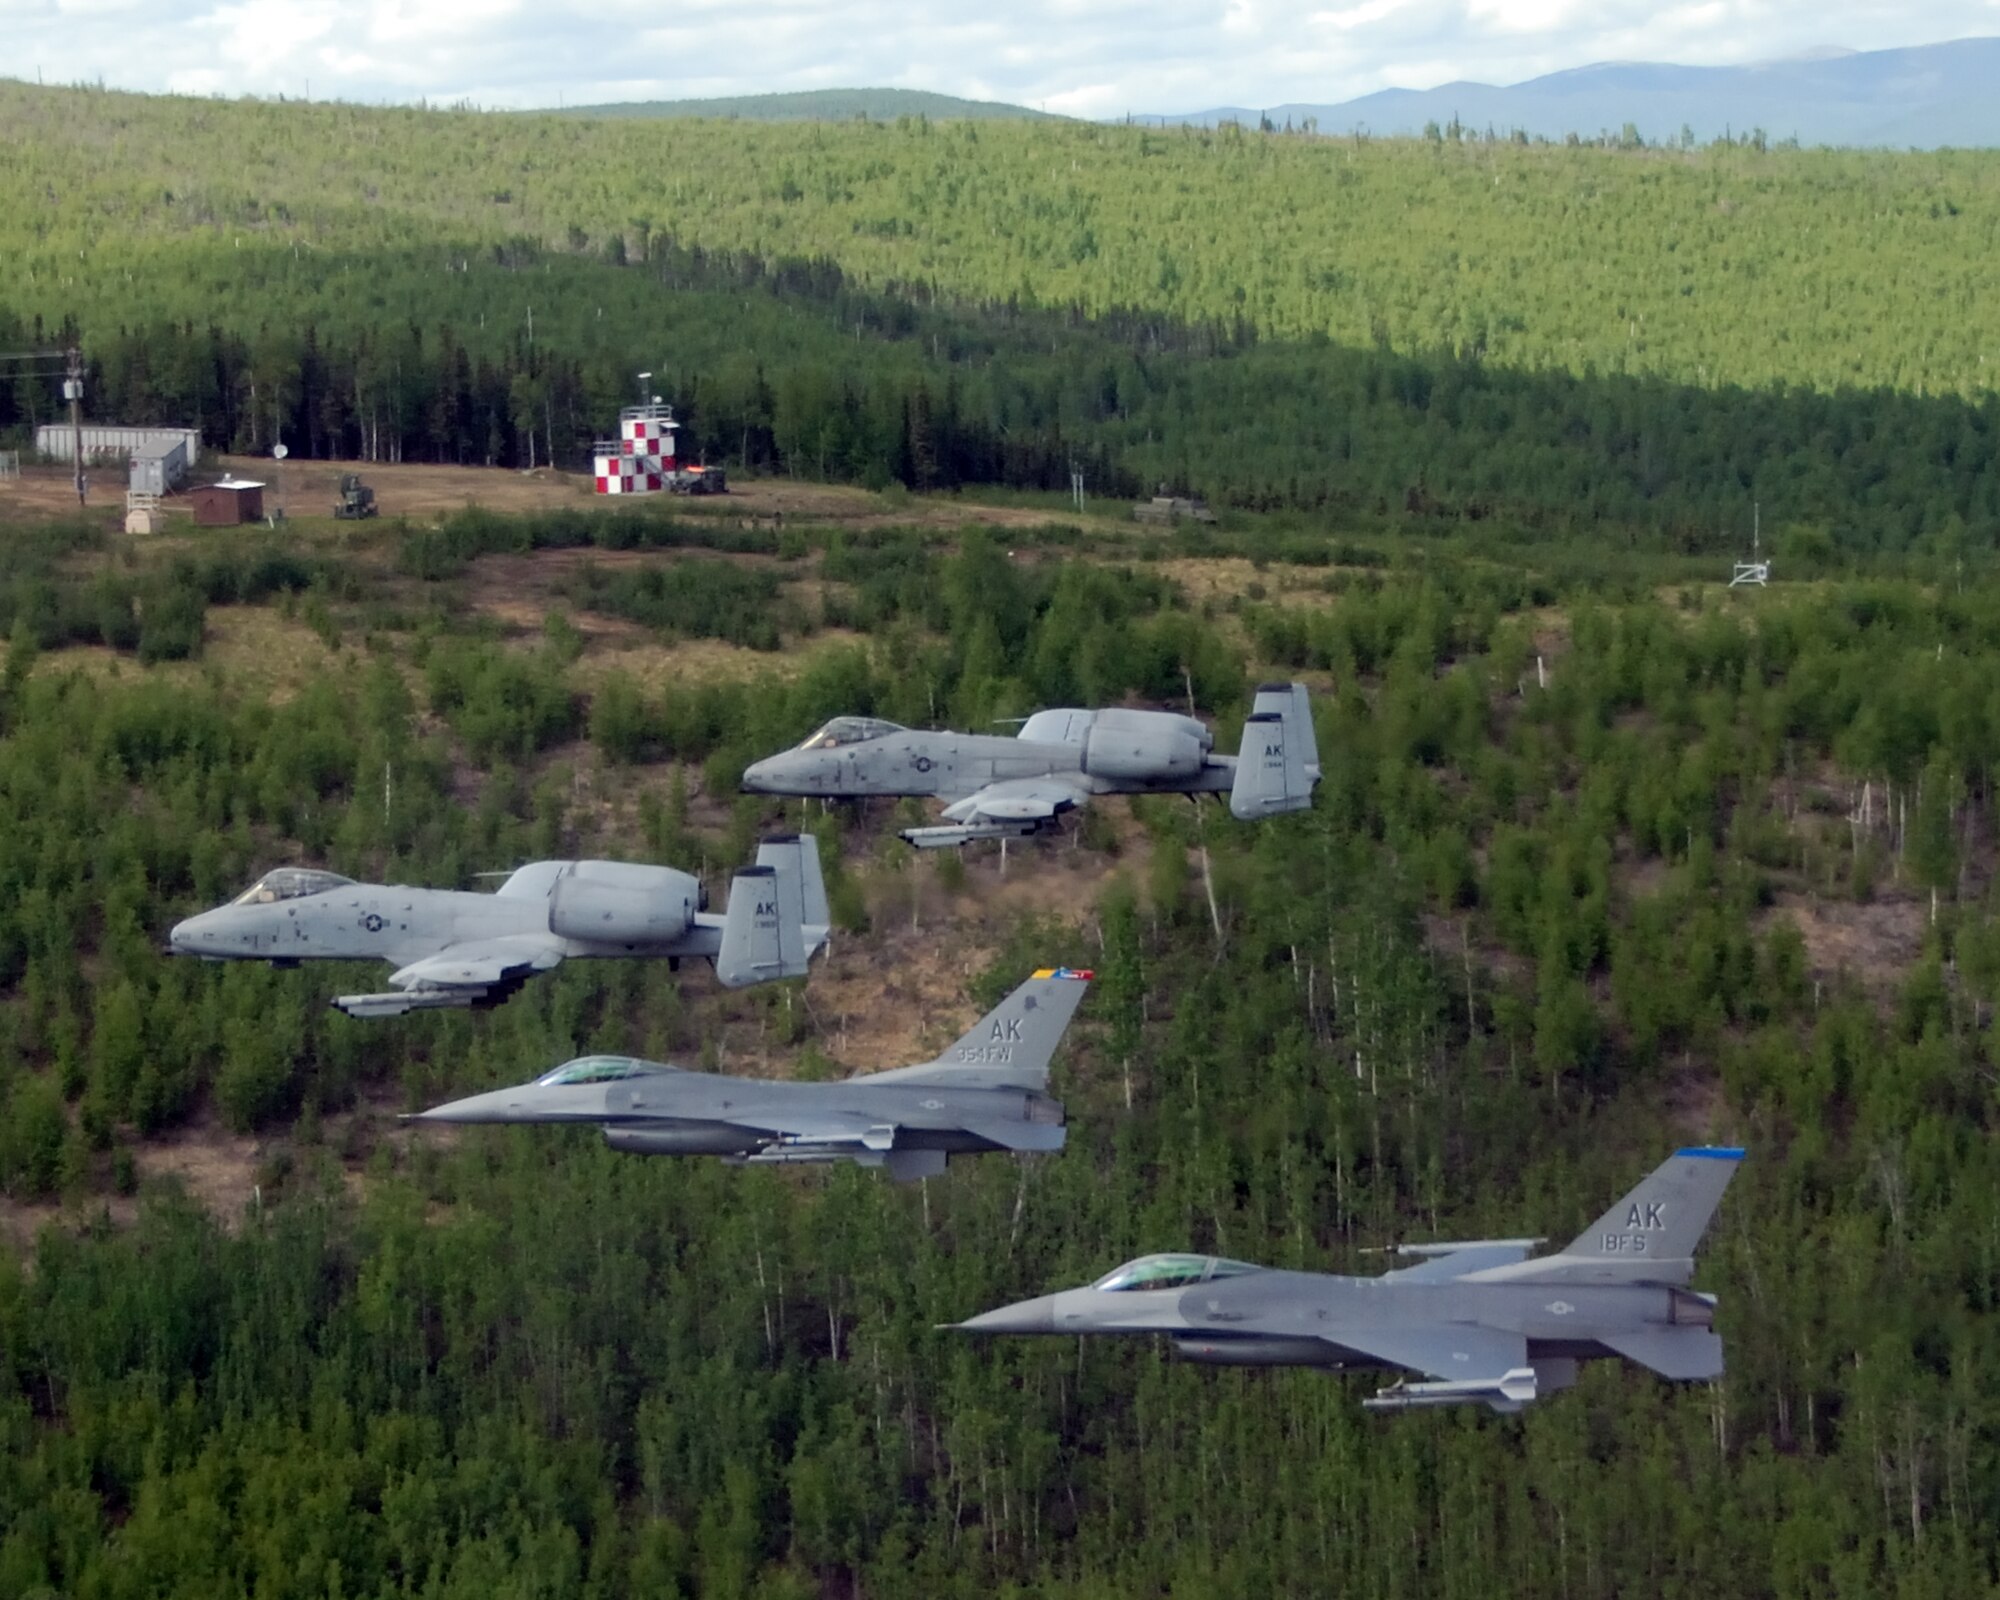 EIELSON AIR FORCE BASE, Alaska --  Joint Terminal Attack Controllers (JTAC) from the 3rd Air Support Operations Squadron, control two F-16 Fighting Falcons from the 18th Fighter Squadron, and two A-10 Wathog II's from the 355th Fighter Squadron May 29, 2007, over the Pacific Alaska Range Complex.  The aircraft assigned to Eielson flew in formation for the last time due to the deactivation of the 355th FS, and the 18th FS.  (U.S. Air Force photo by Master Sergeant Rob Wieland)